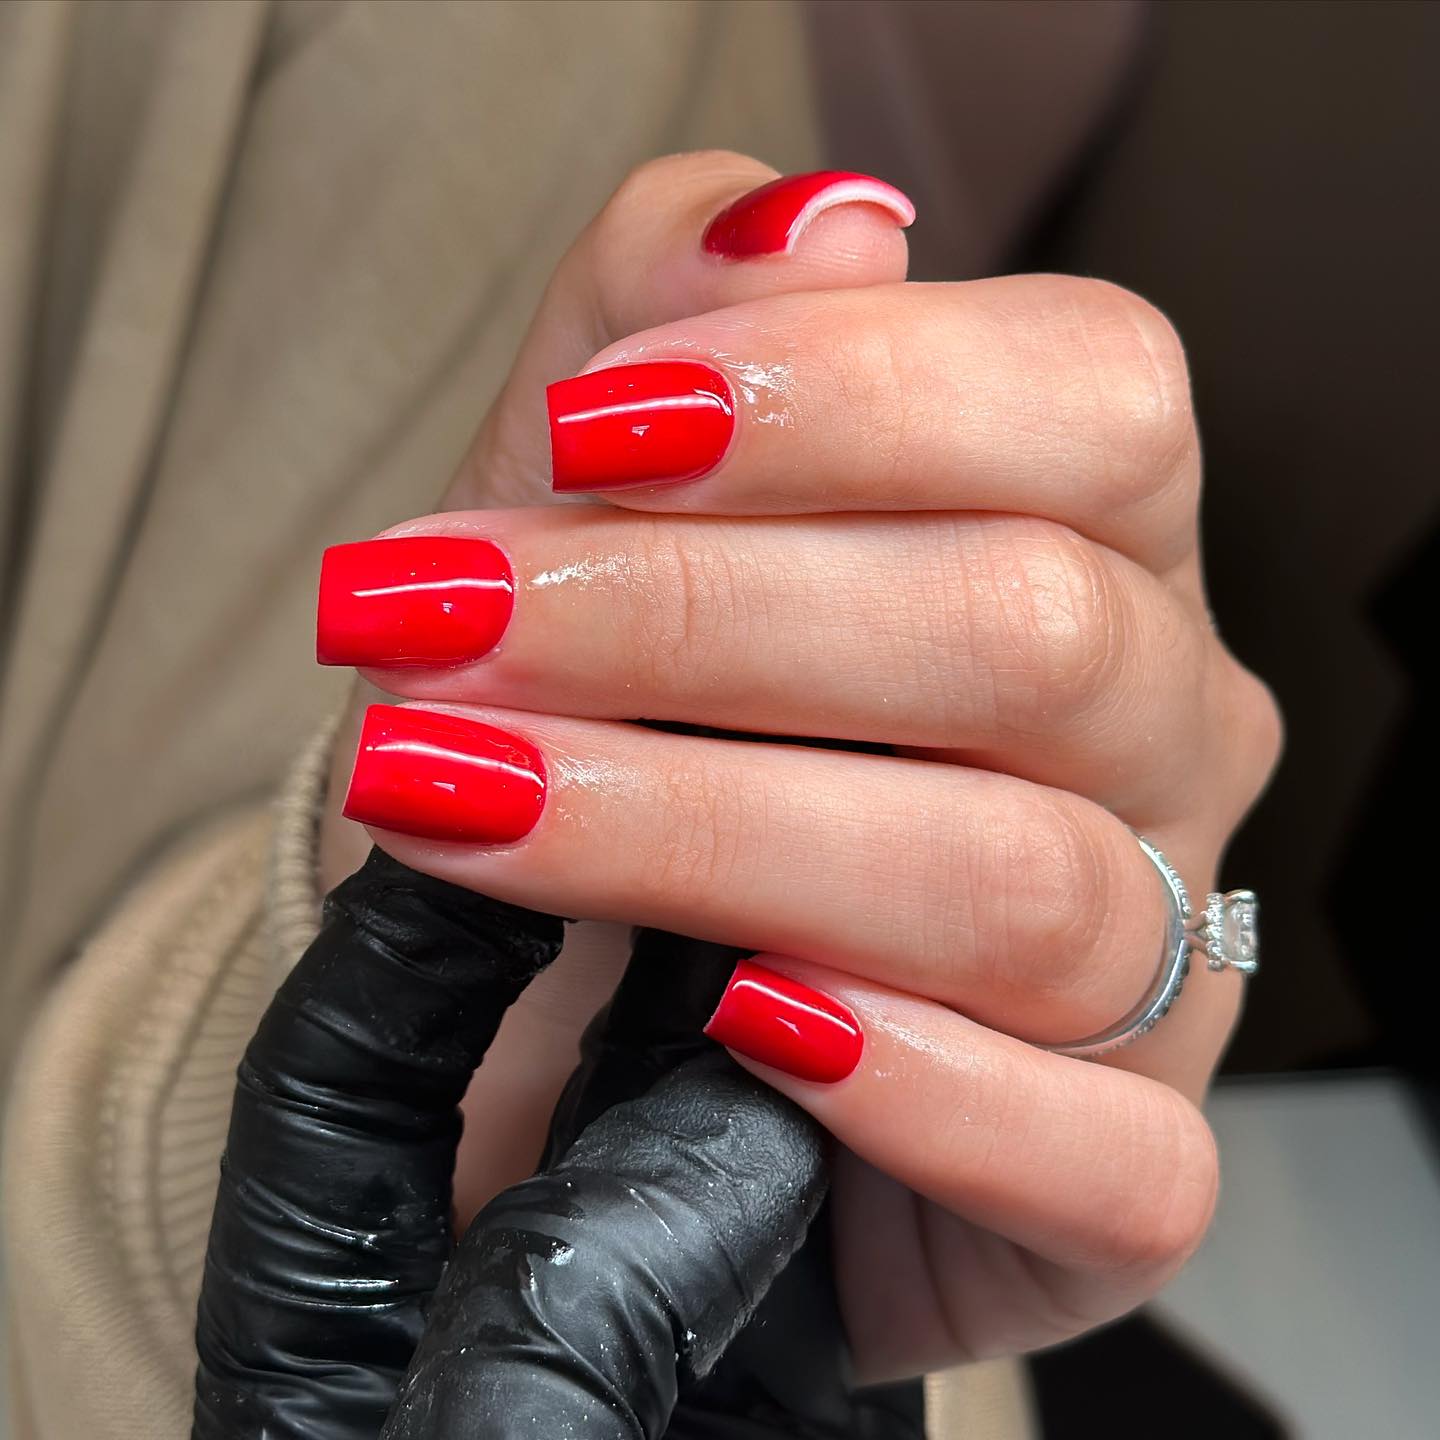 The Glam Angel - A picture of a hand with freshly painted red nails